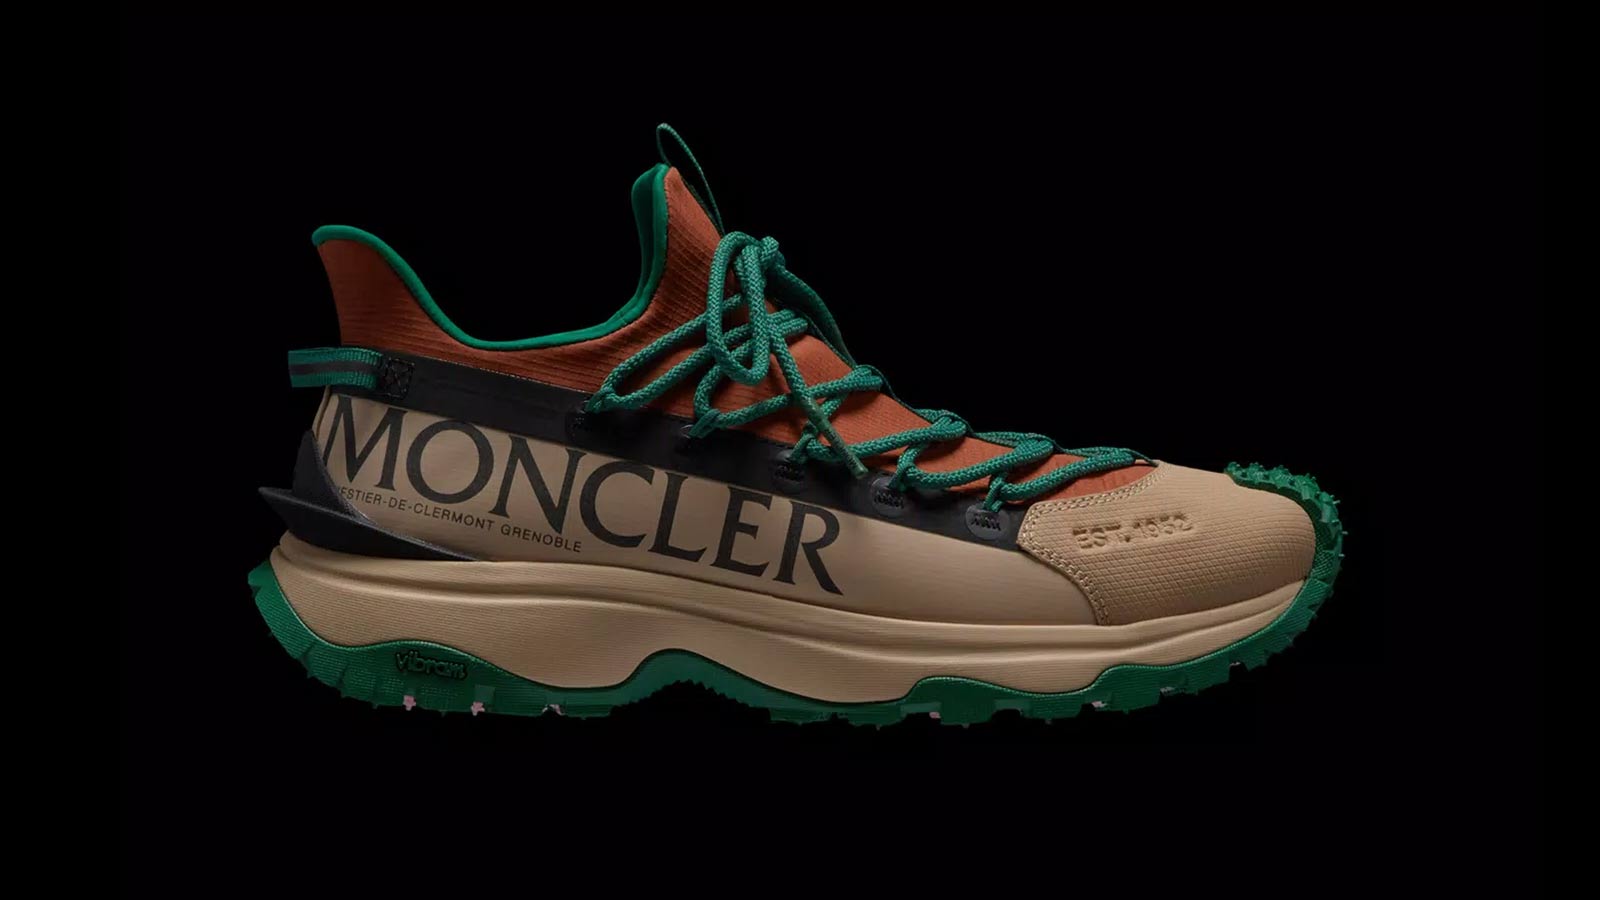 Moncler Trailgrip Lite 2 Sneakers Are Trail And Street Ready - IMBOLDN